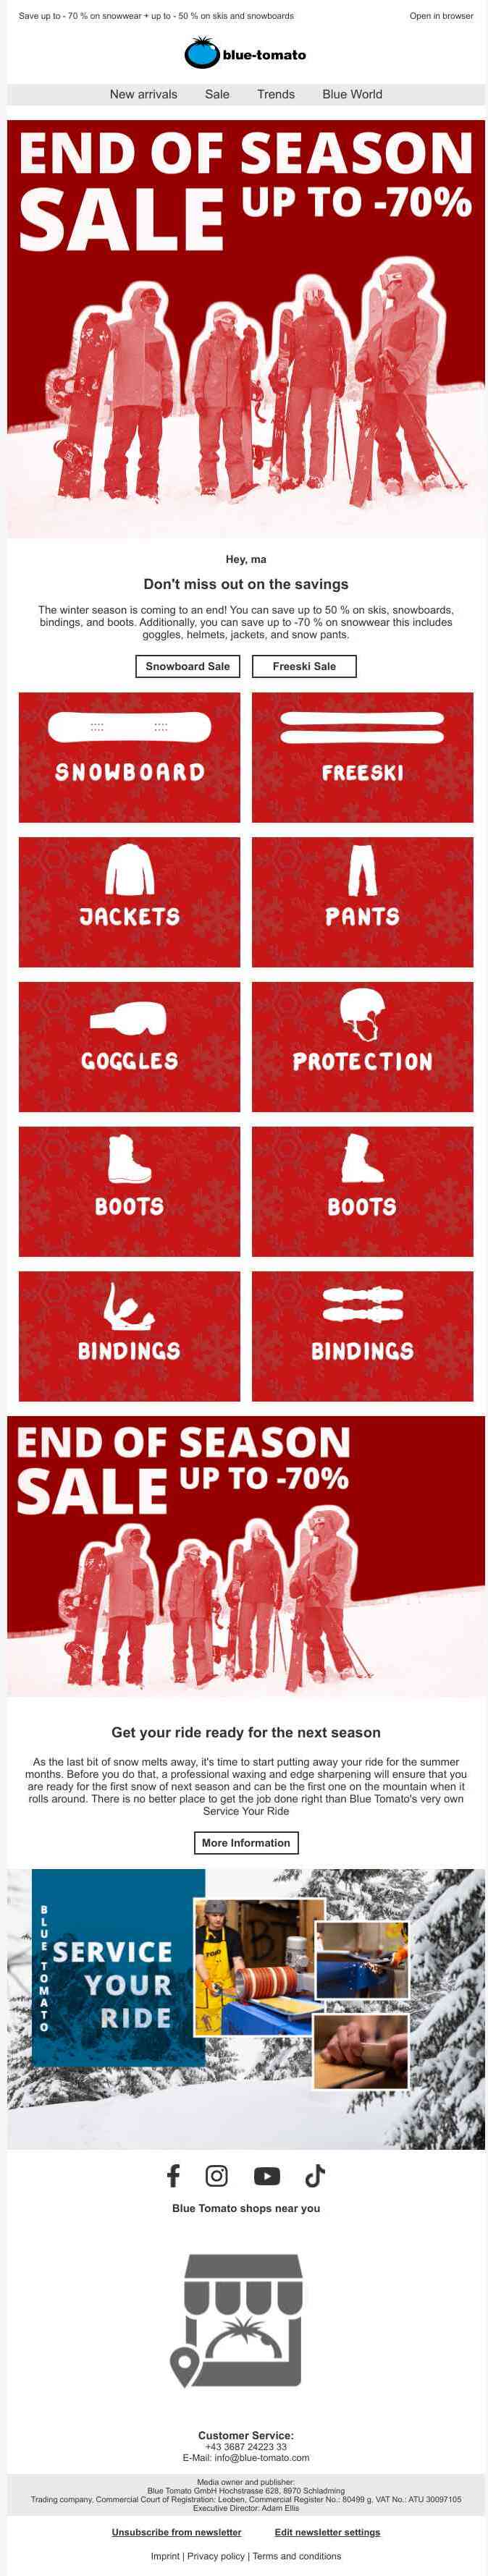 Save in the end of season sale